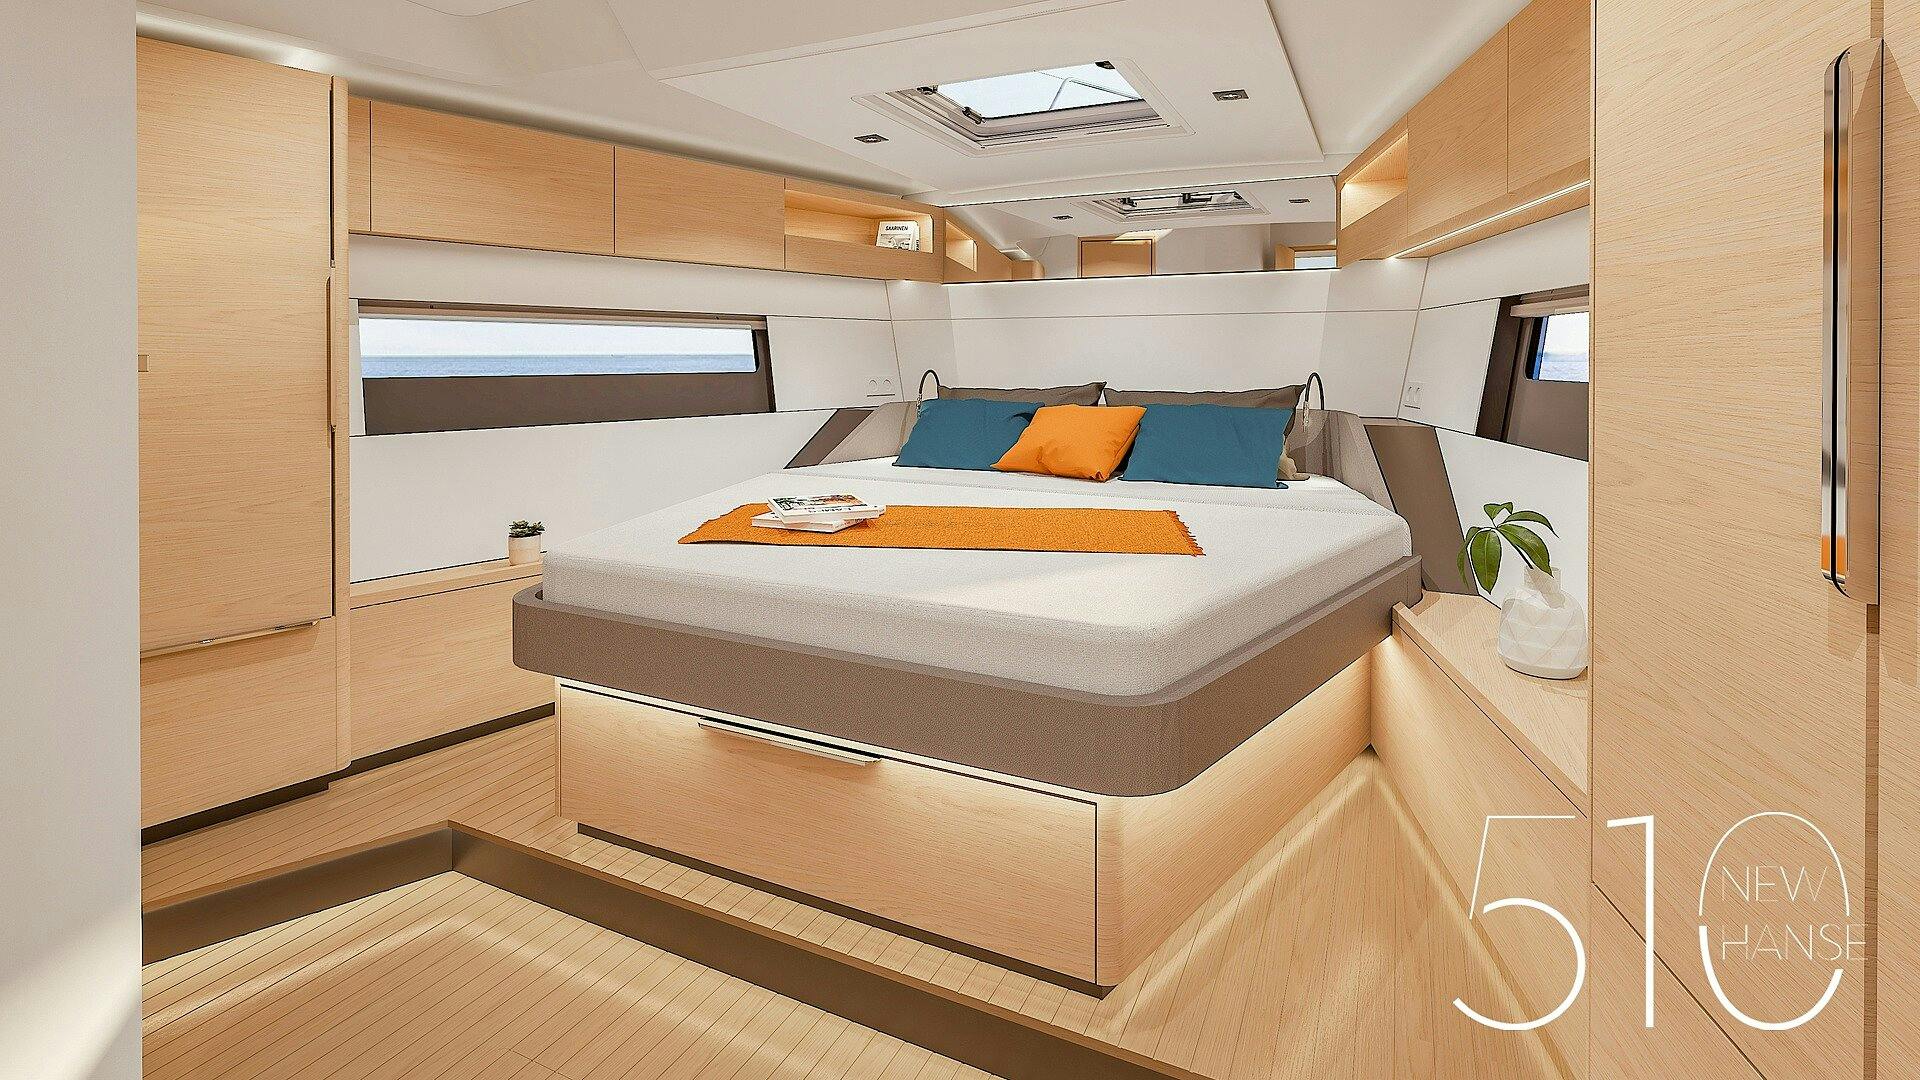 Hanse 510 sophisticated design creates a feeling of luxury and ample space below deck